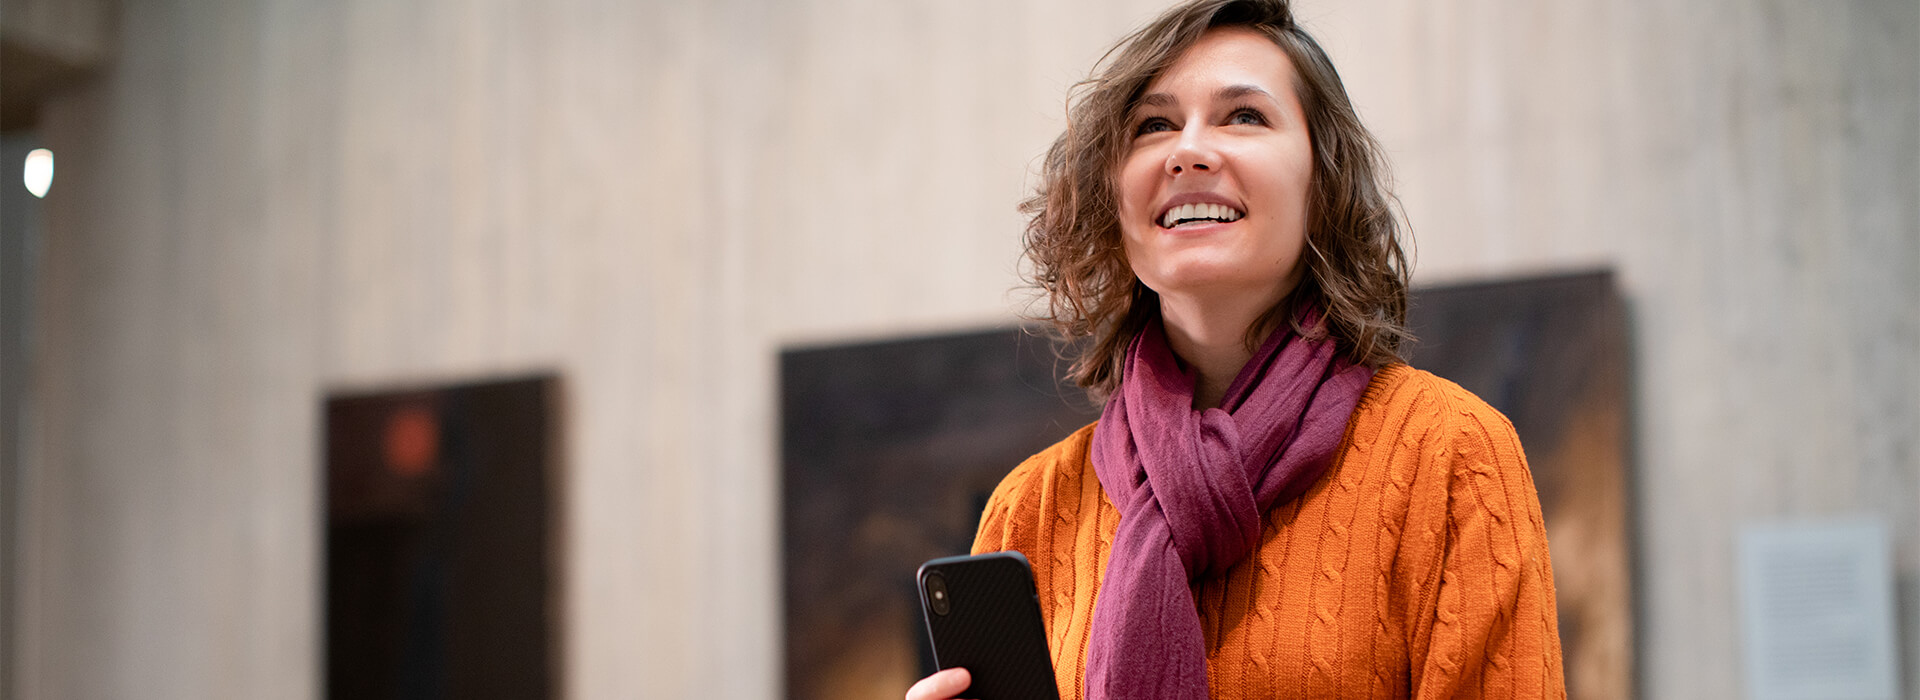 Woman holds a phone and smiles while looking up in a gallery